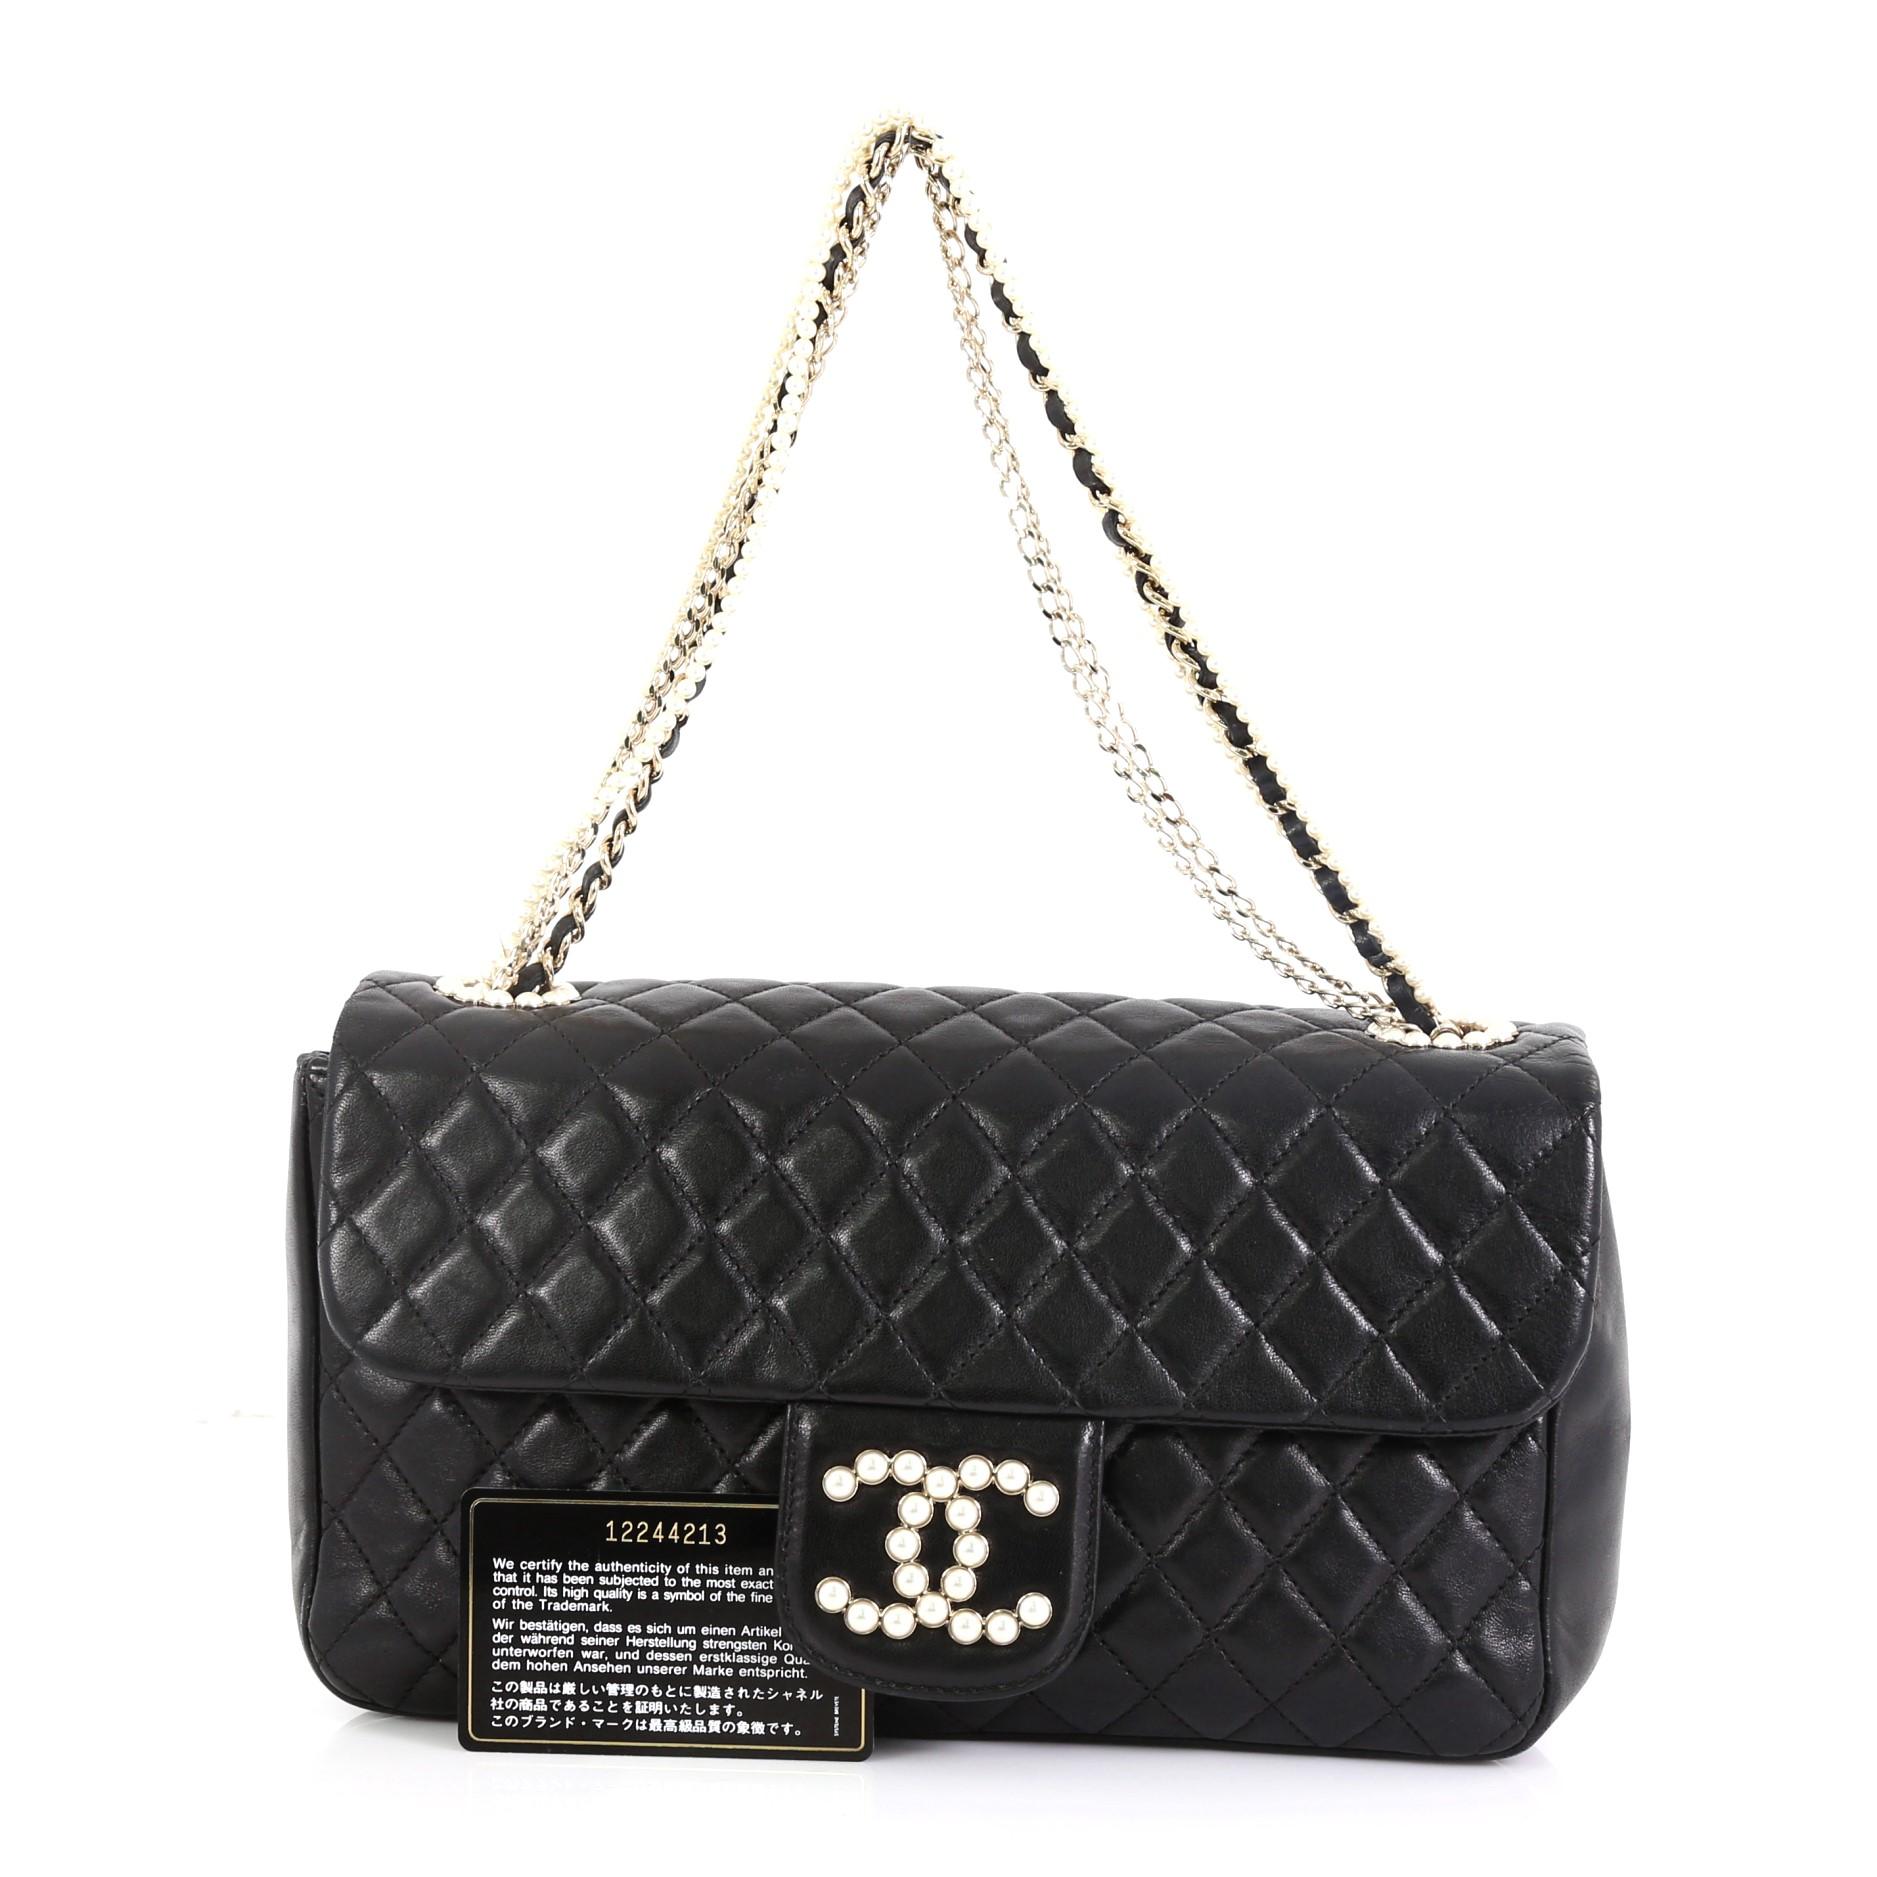 This Chanel Westminster Pearl Chain Flap Bag Quilted Lambskin Medium, crafted from black quilted lambskin leather, features chain and pearl strap, pearl-studded CC logo, and gold-tone hardware. Its magnetic snap button closure opens to a gray fabric